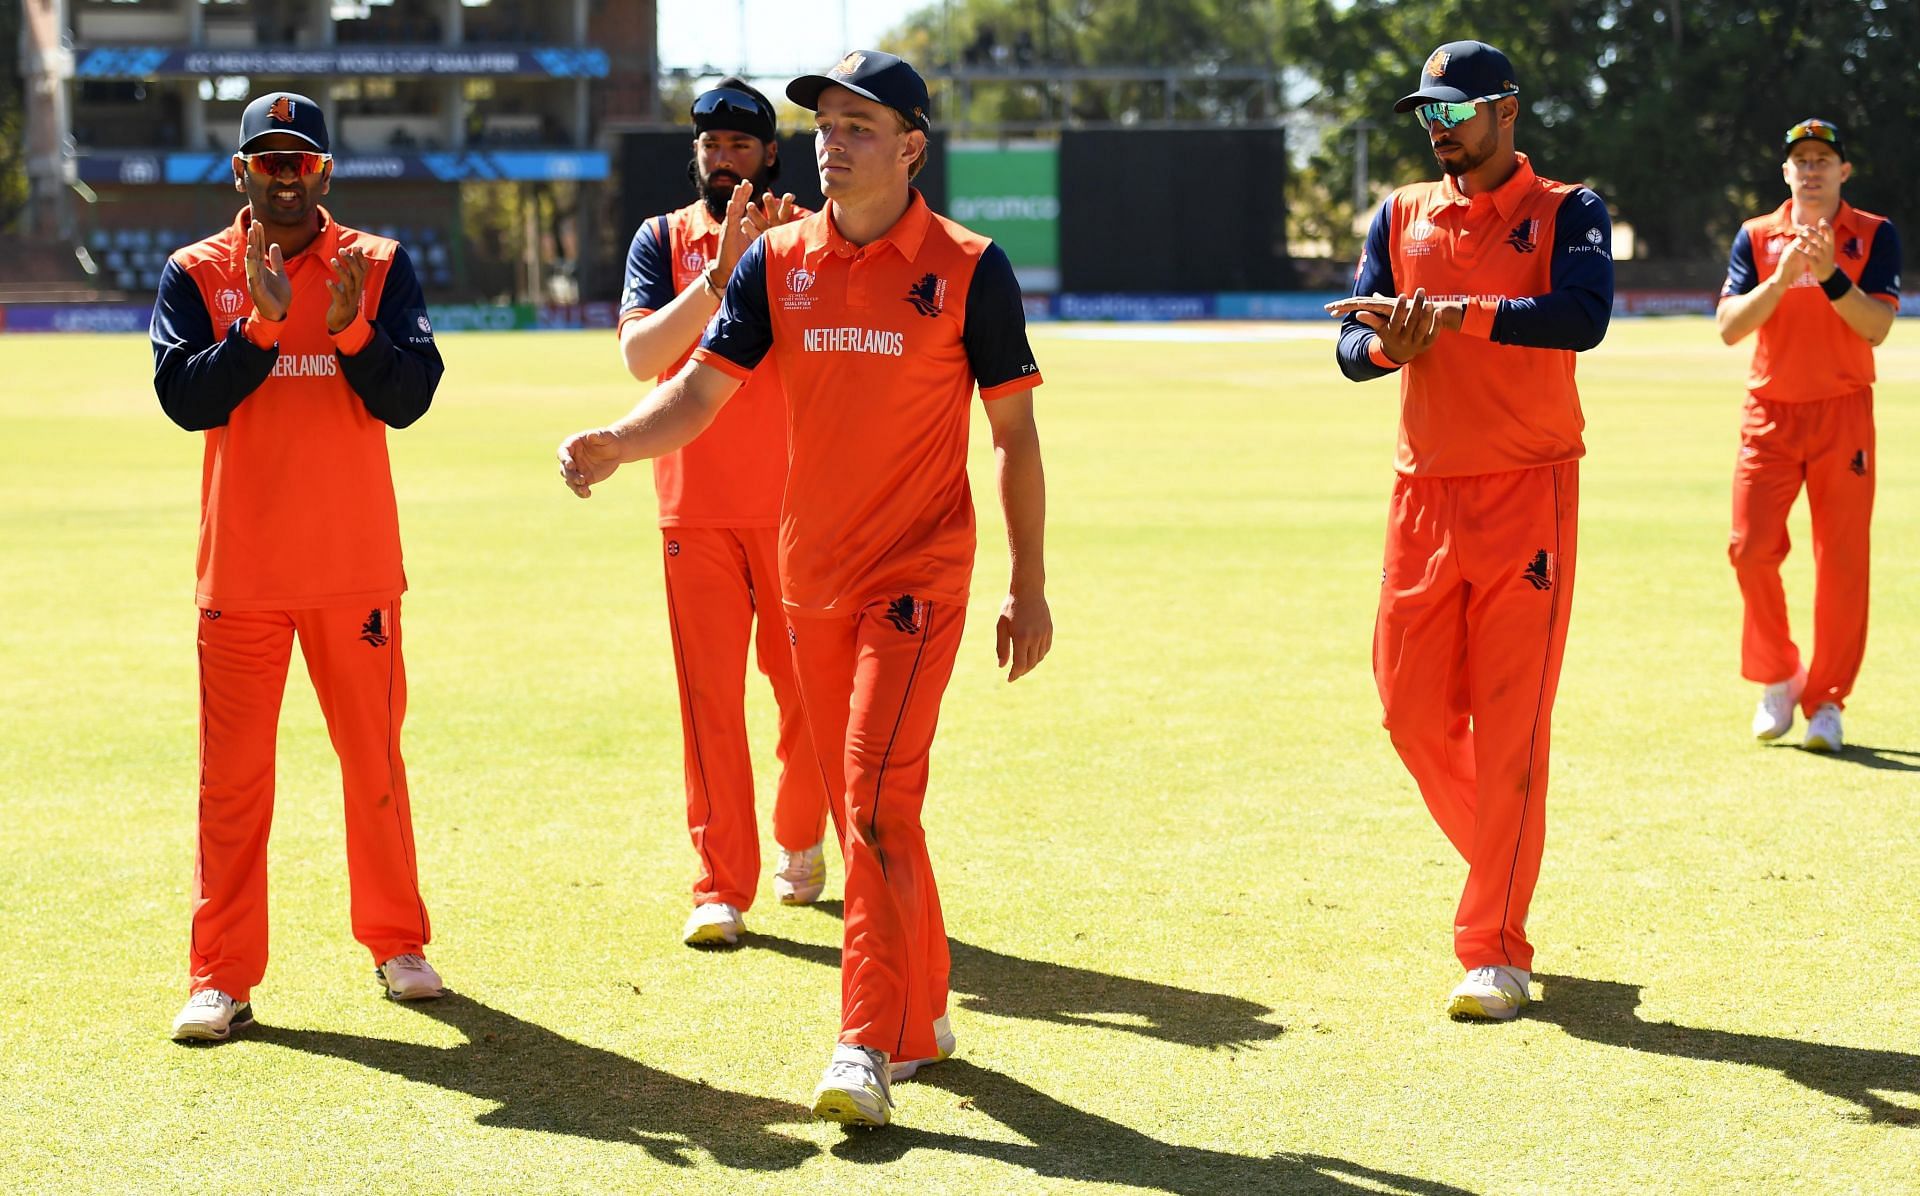 Bas de Leede produced one of the best performances by a Dutch cricketer in ODIs